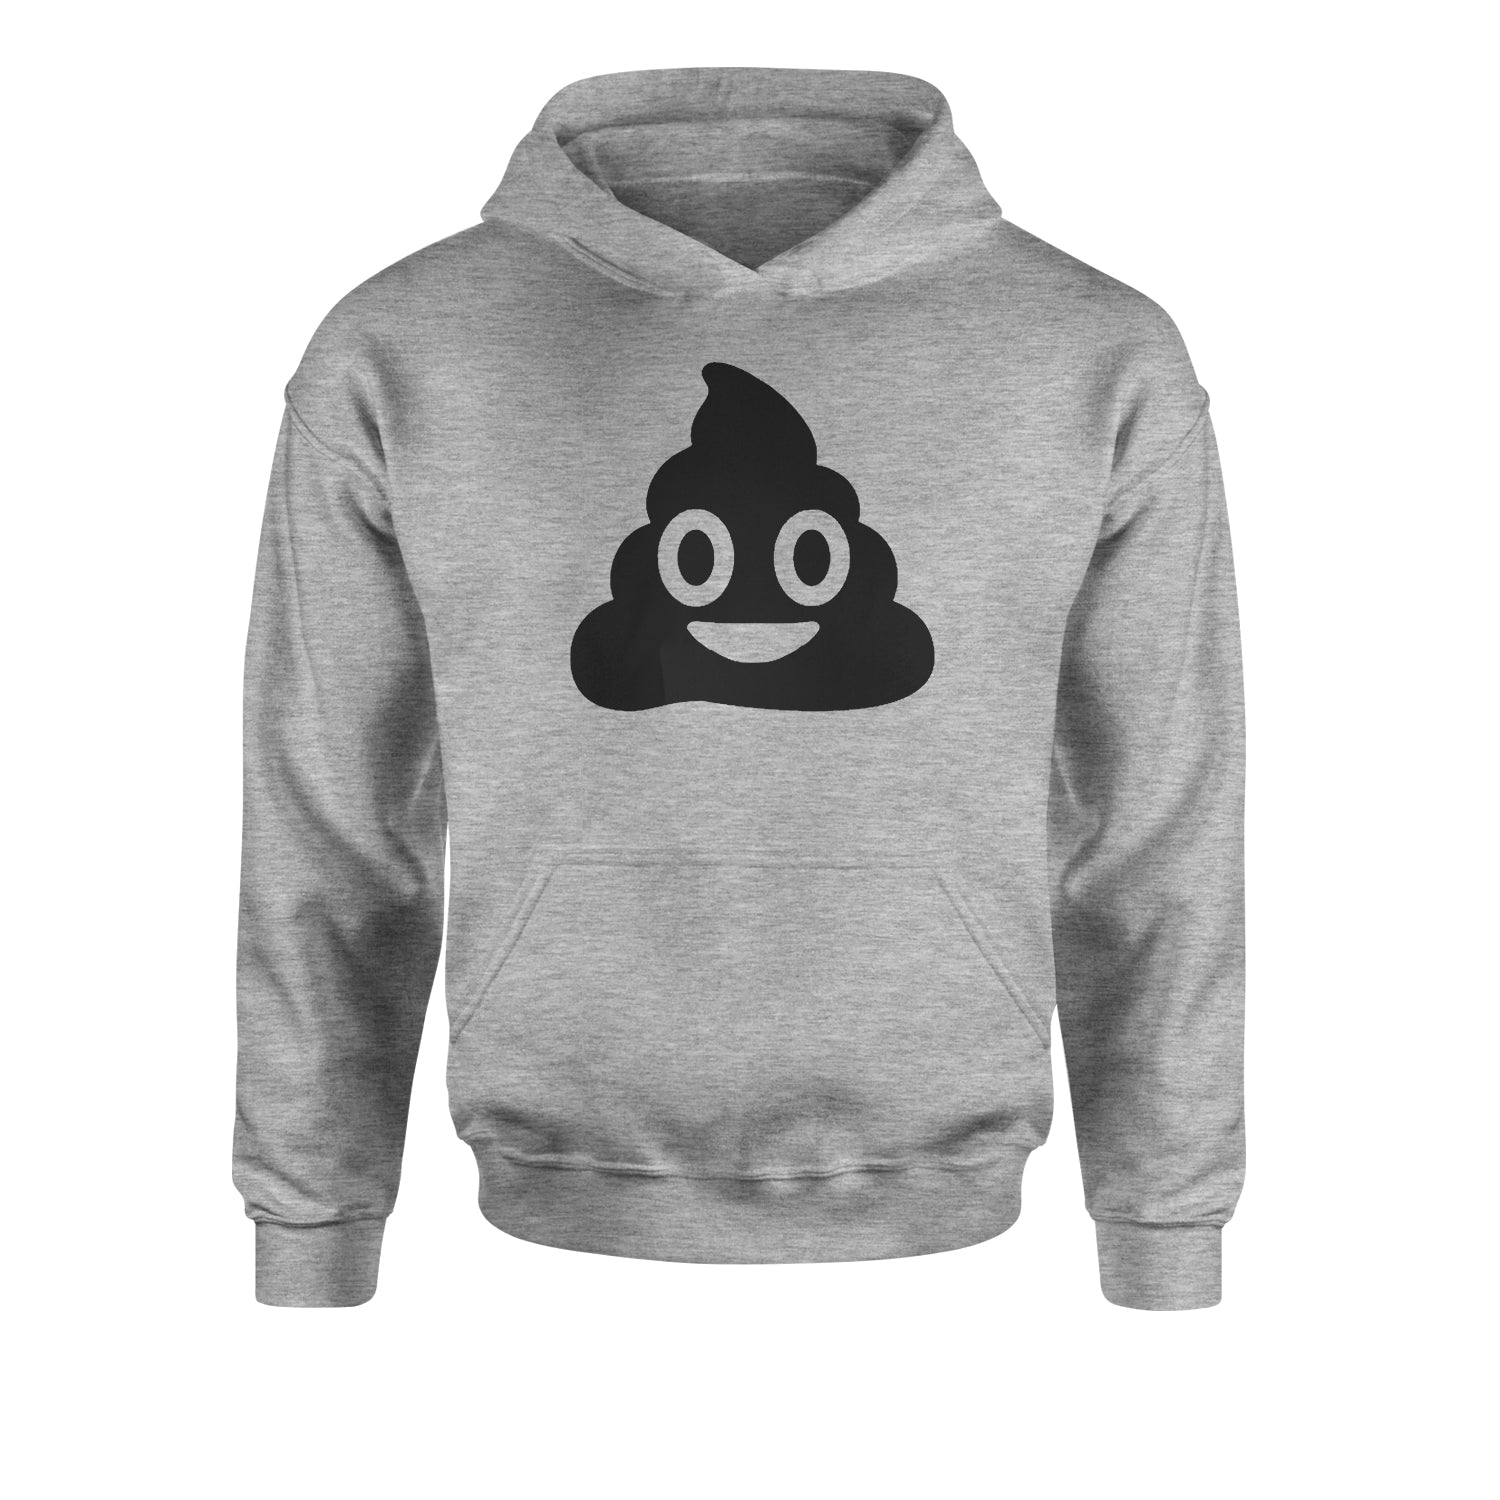 Emoticon Poop Face Smile Face Youth-Sized Hoodie cosplay, costume, dress, emoji, emote, face, halloween, smiley, up, yellow, youth-sized by Expression Tees